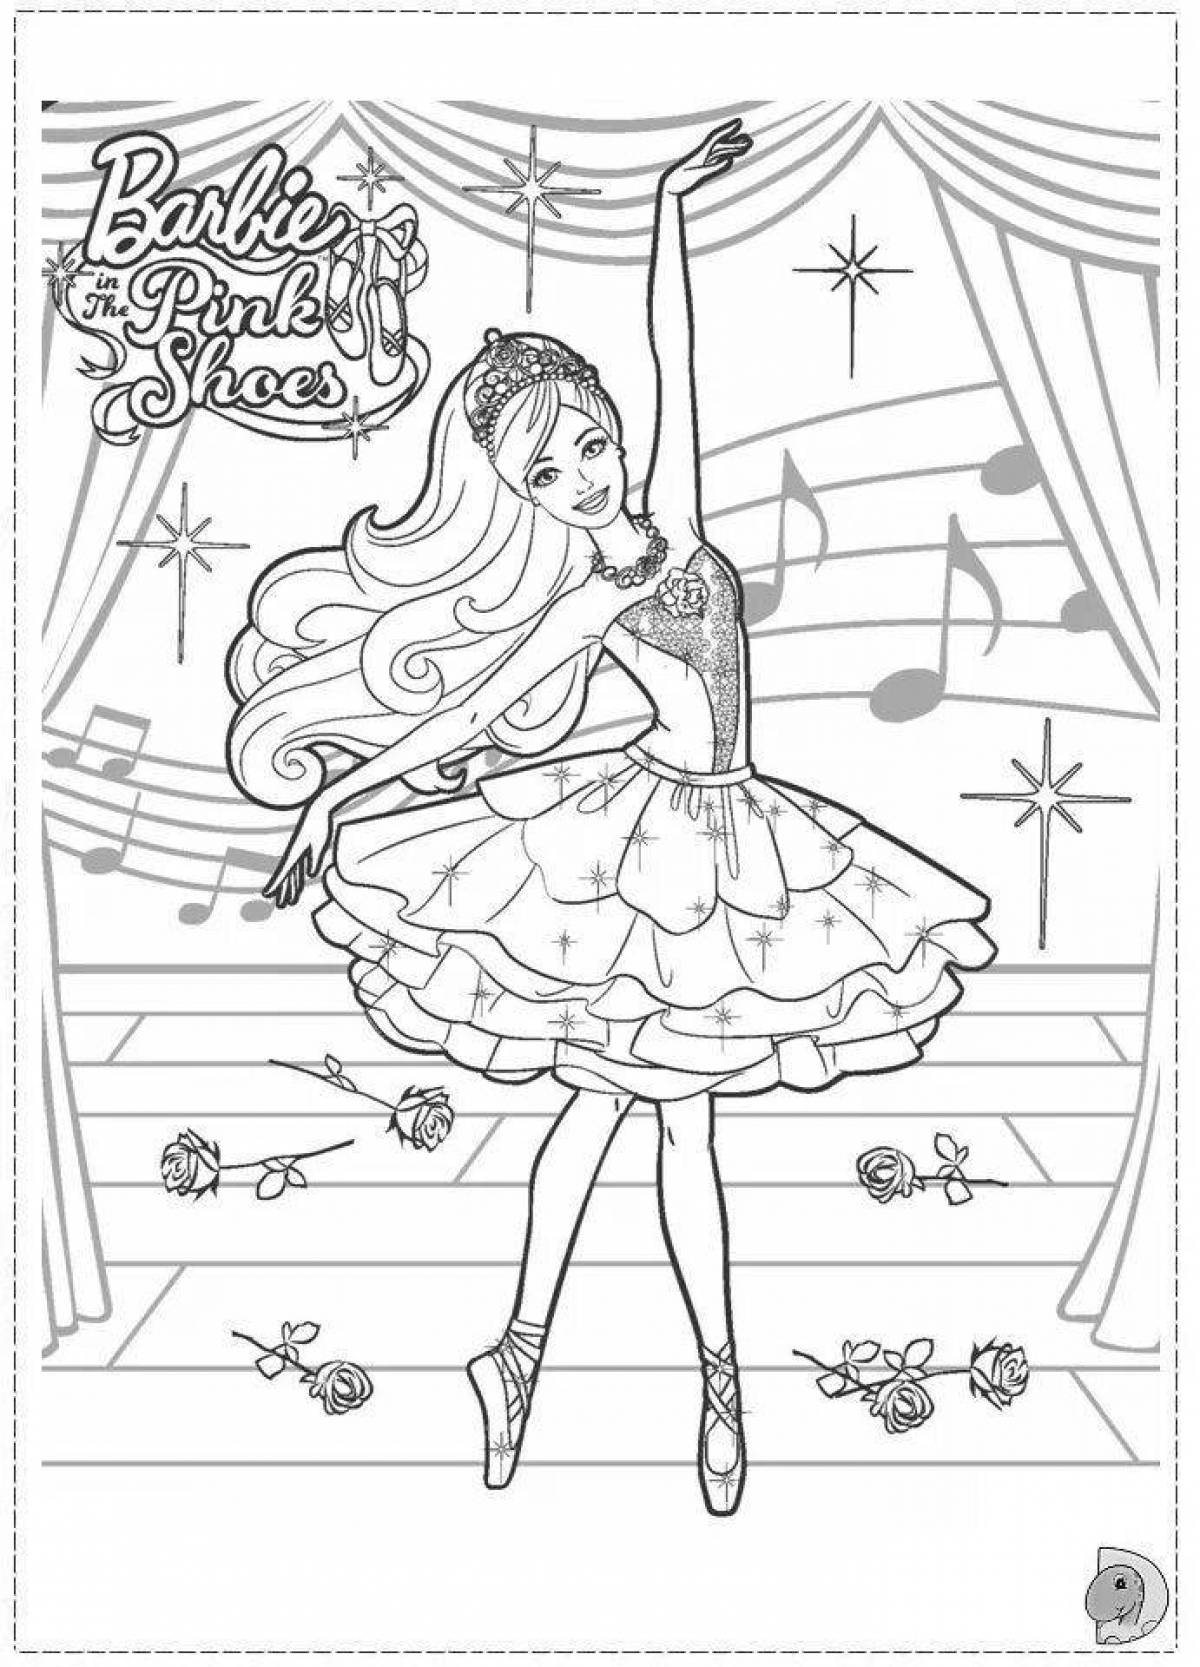 Cute ballerina coloring pages for girls